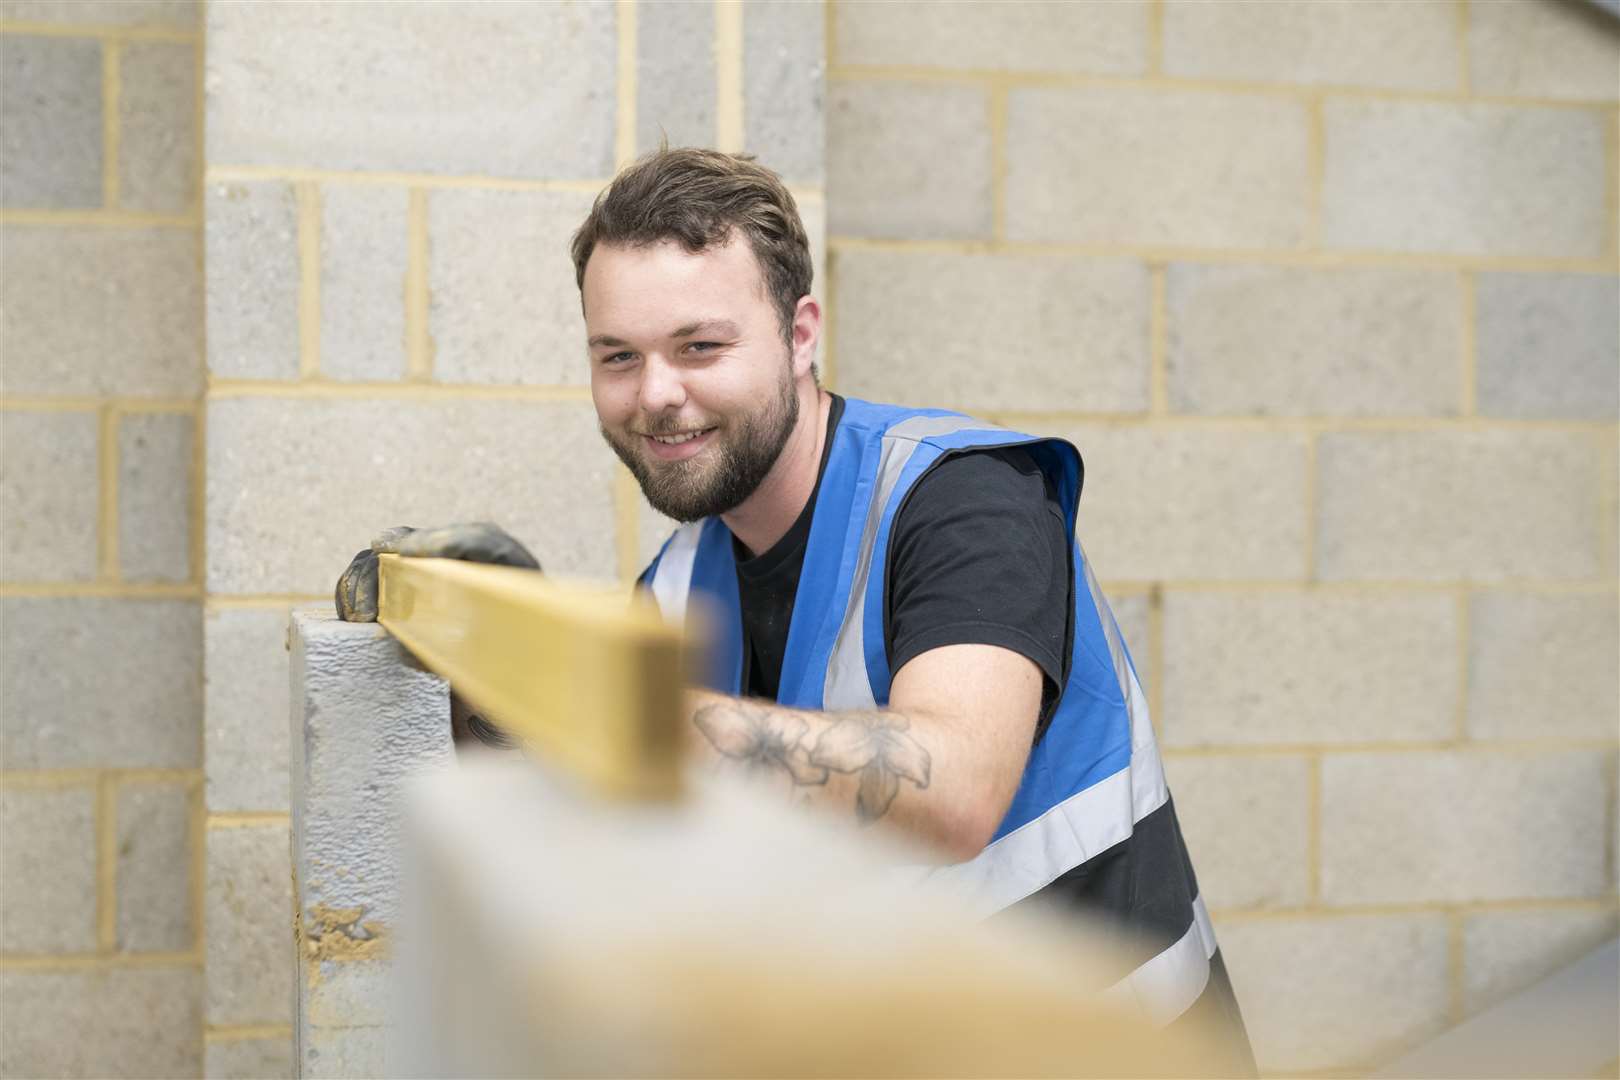 East Kent College has been active in encouraging apprentices and vocational training (7618869)